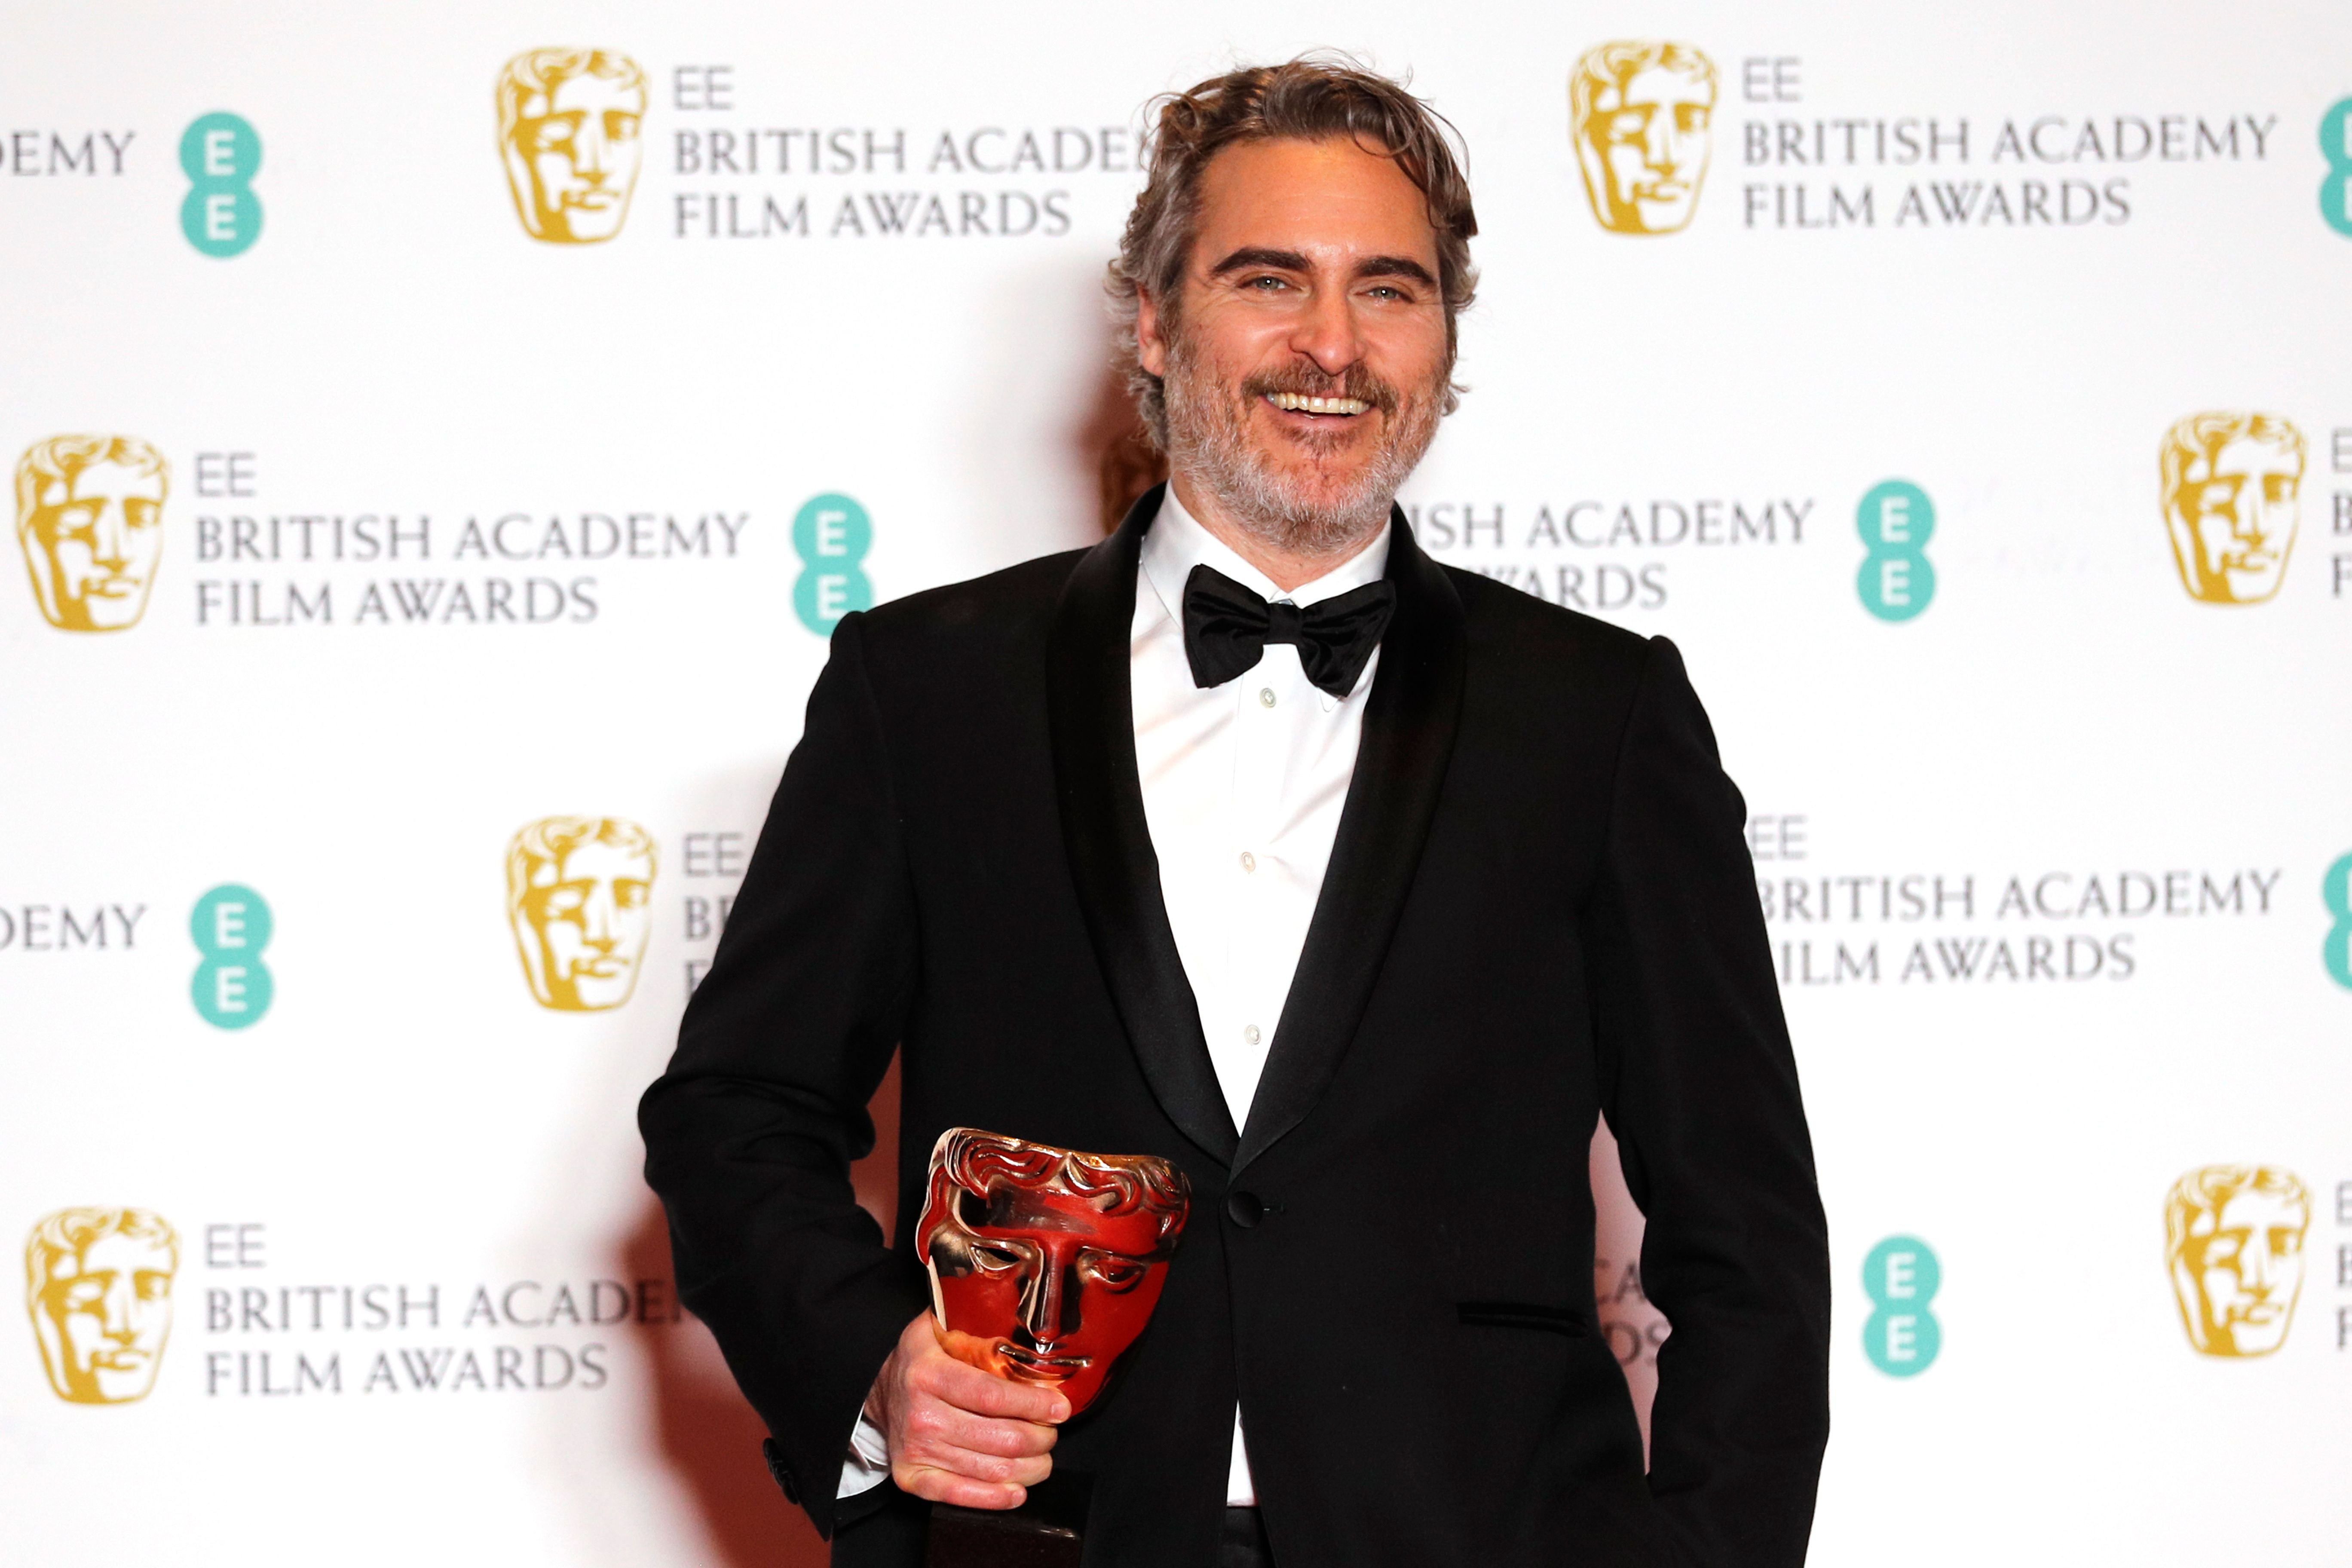 Joaquin Phoenix at the BAFTA British Academy Film Awards on February 2, 2020 | Source: Getty Images